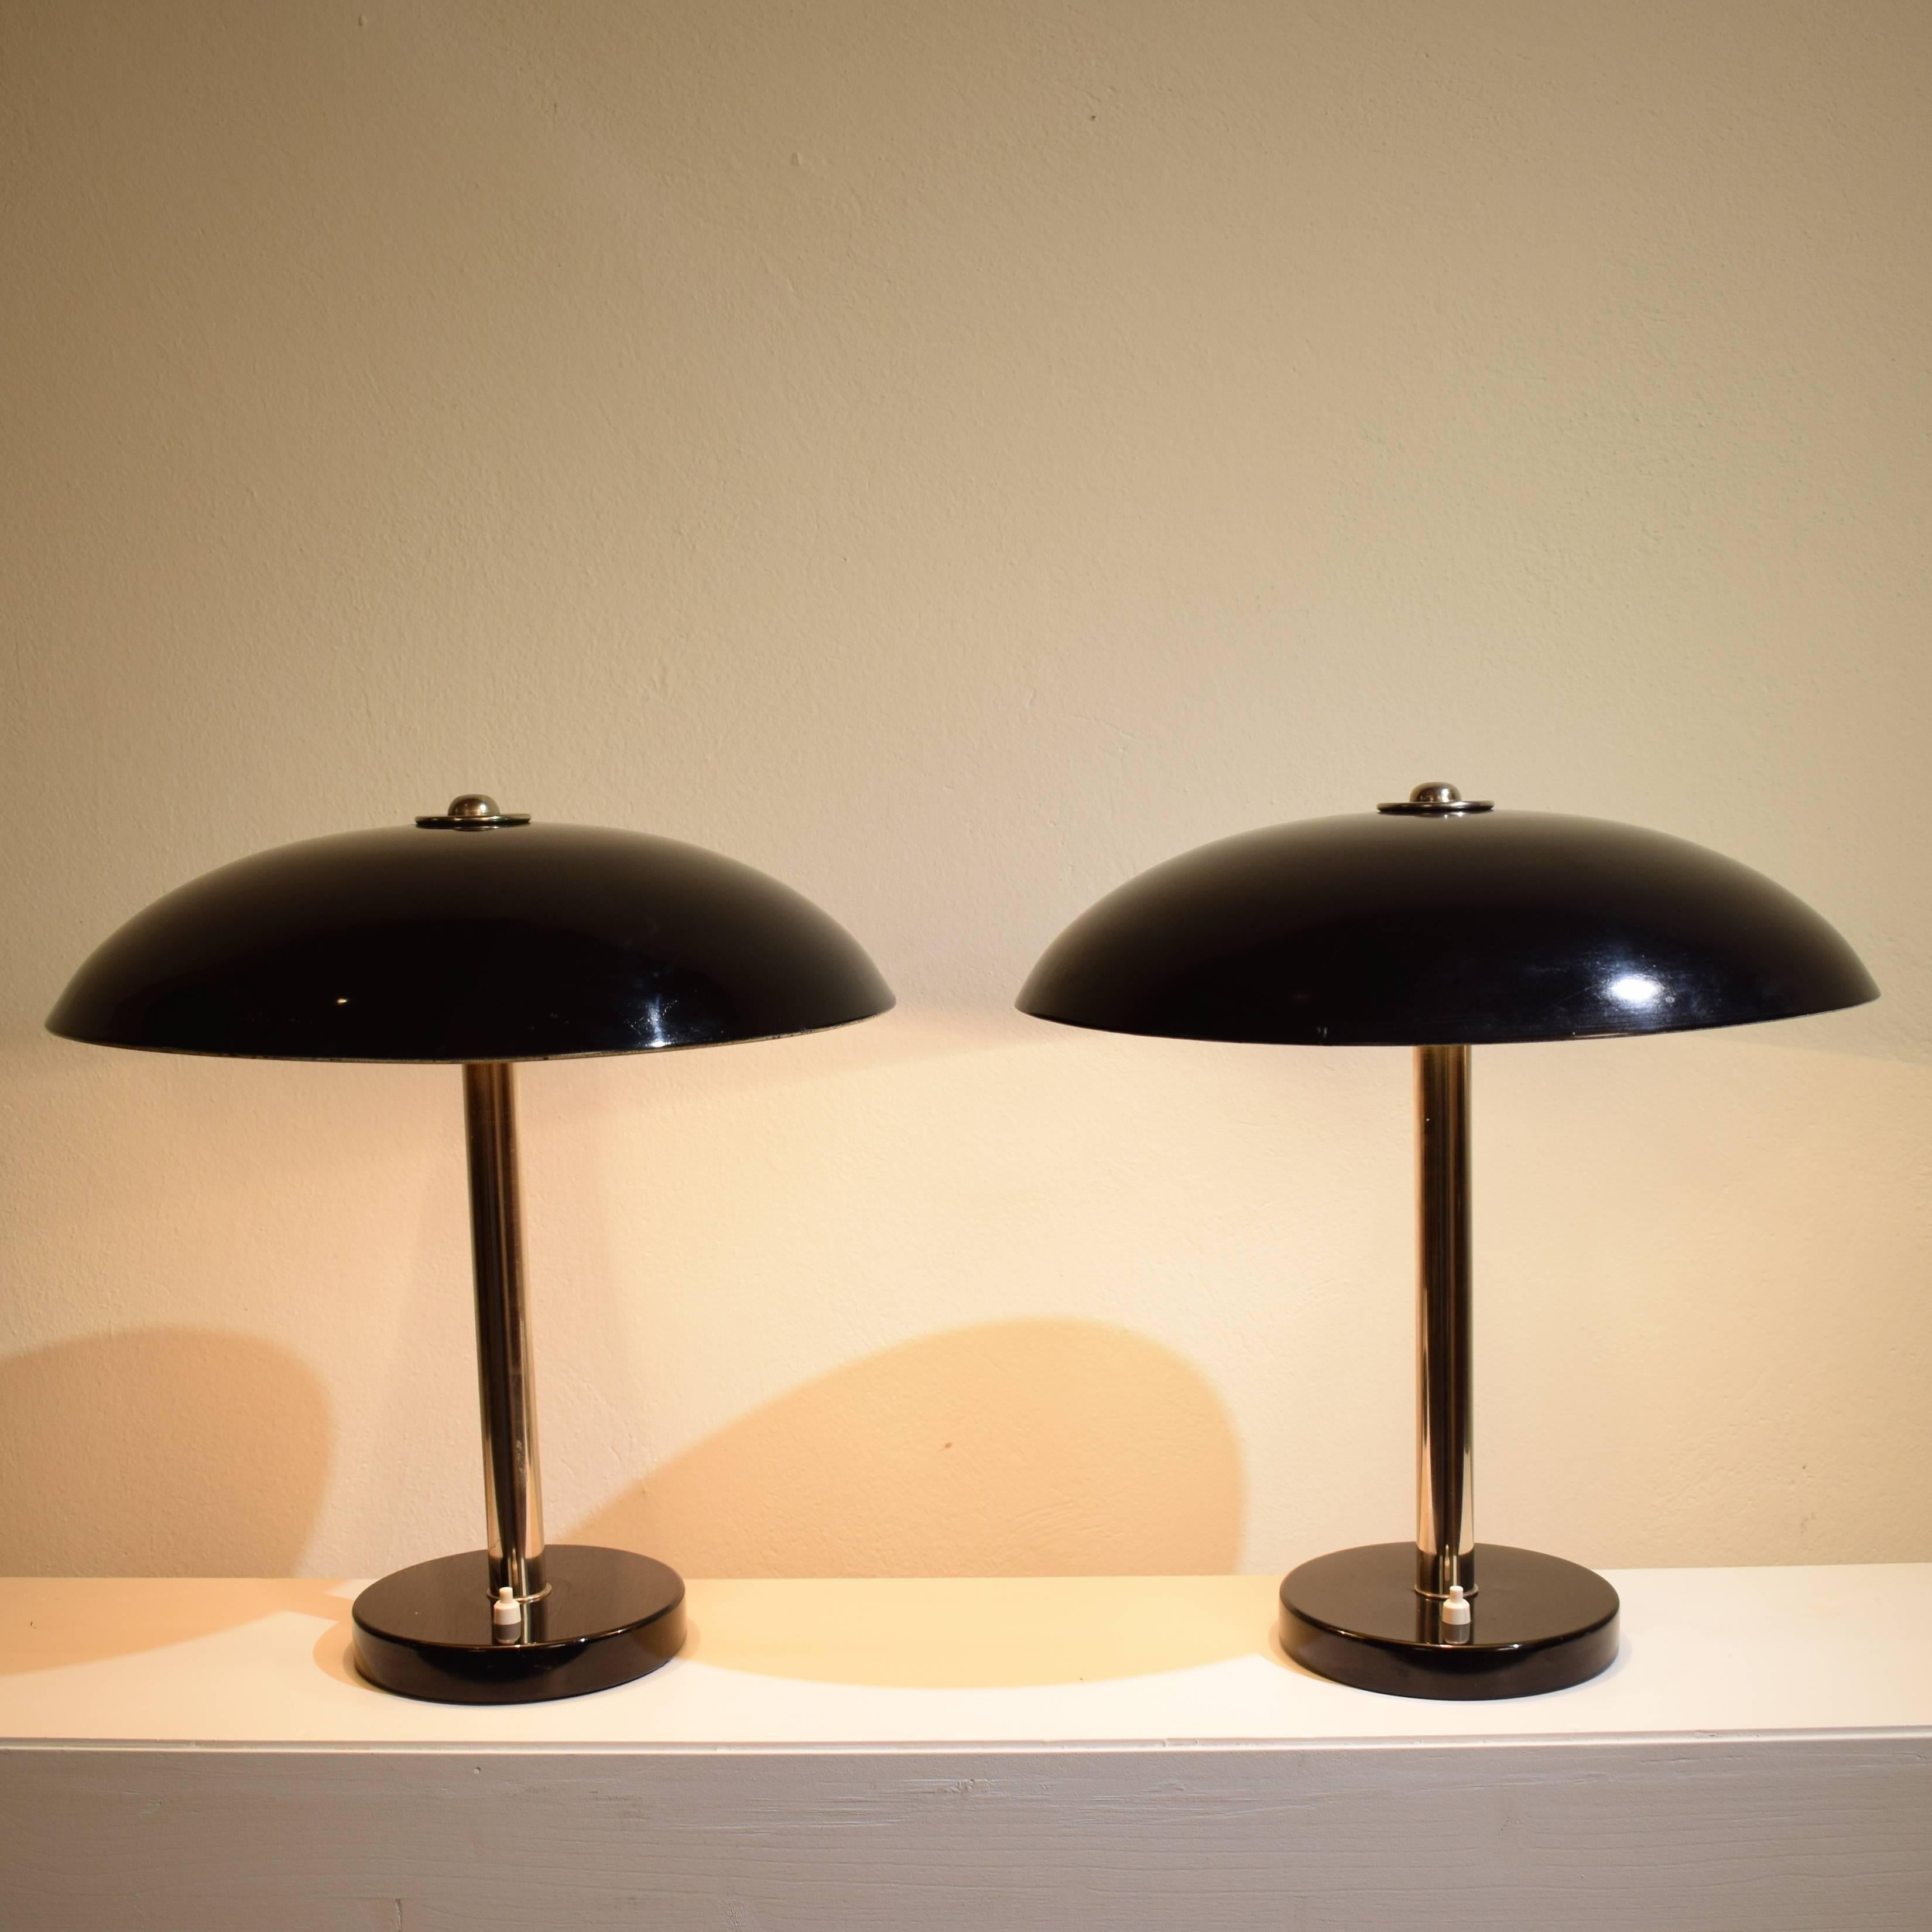 This pair of table lamps where designed by Christian Dell in 1931 for Bünte & Remmler.
The Lamps are in very good original condition. It is very rare to get a pair of it.